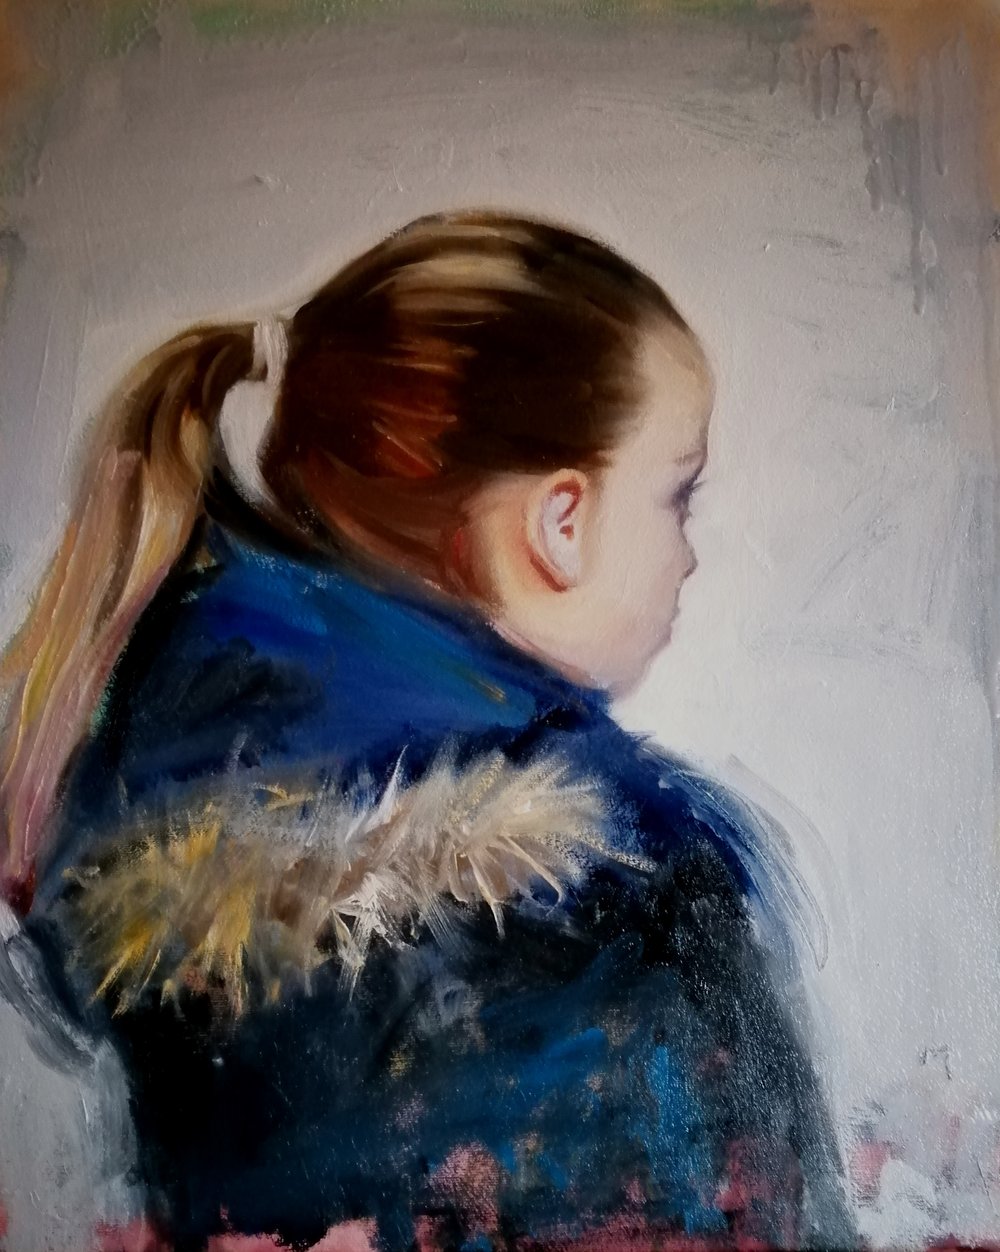  Ponytail and fur collar  Oil on canvas  40x50cm  £600  Portrait of a girl with a pony tail with a fur collar looking out into a white void, or light; whatever the viewer likes to imagine. Gentle and poignant 